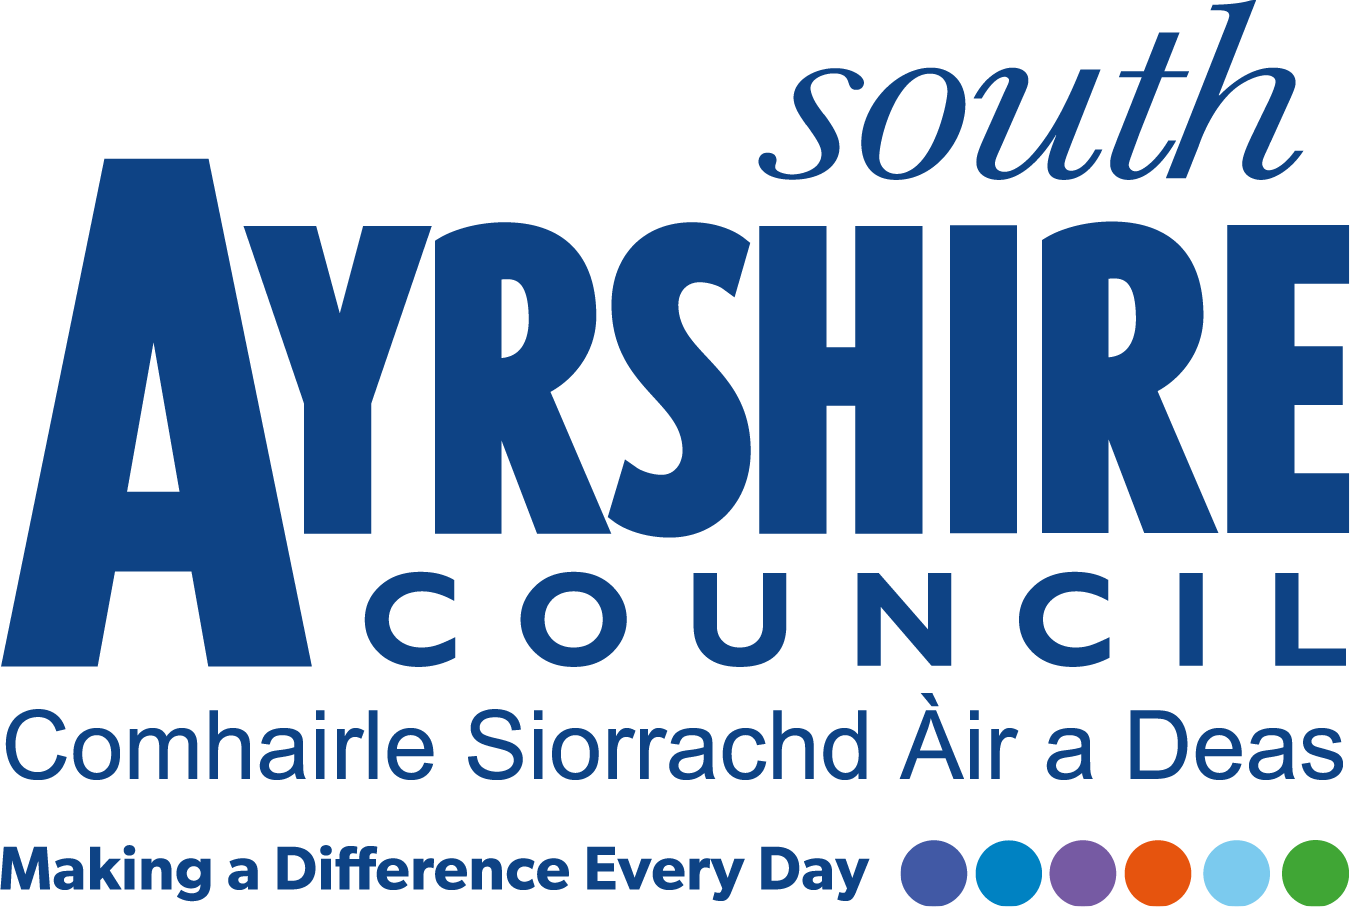 The South Ayrhire Council Logo in blue